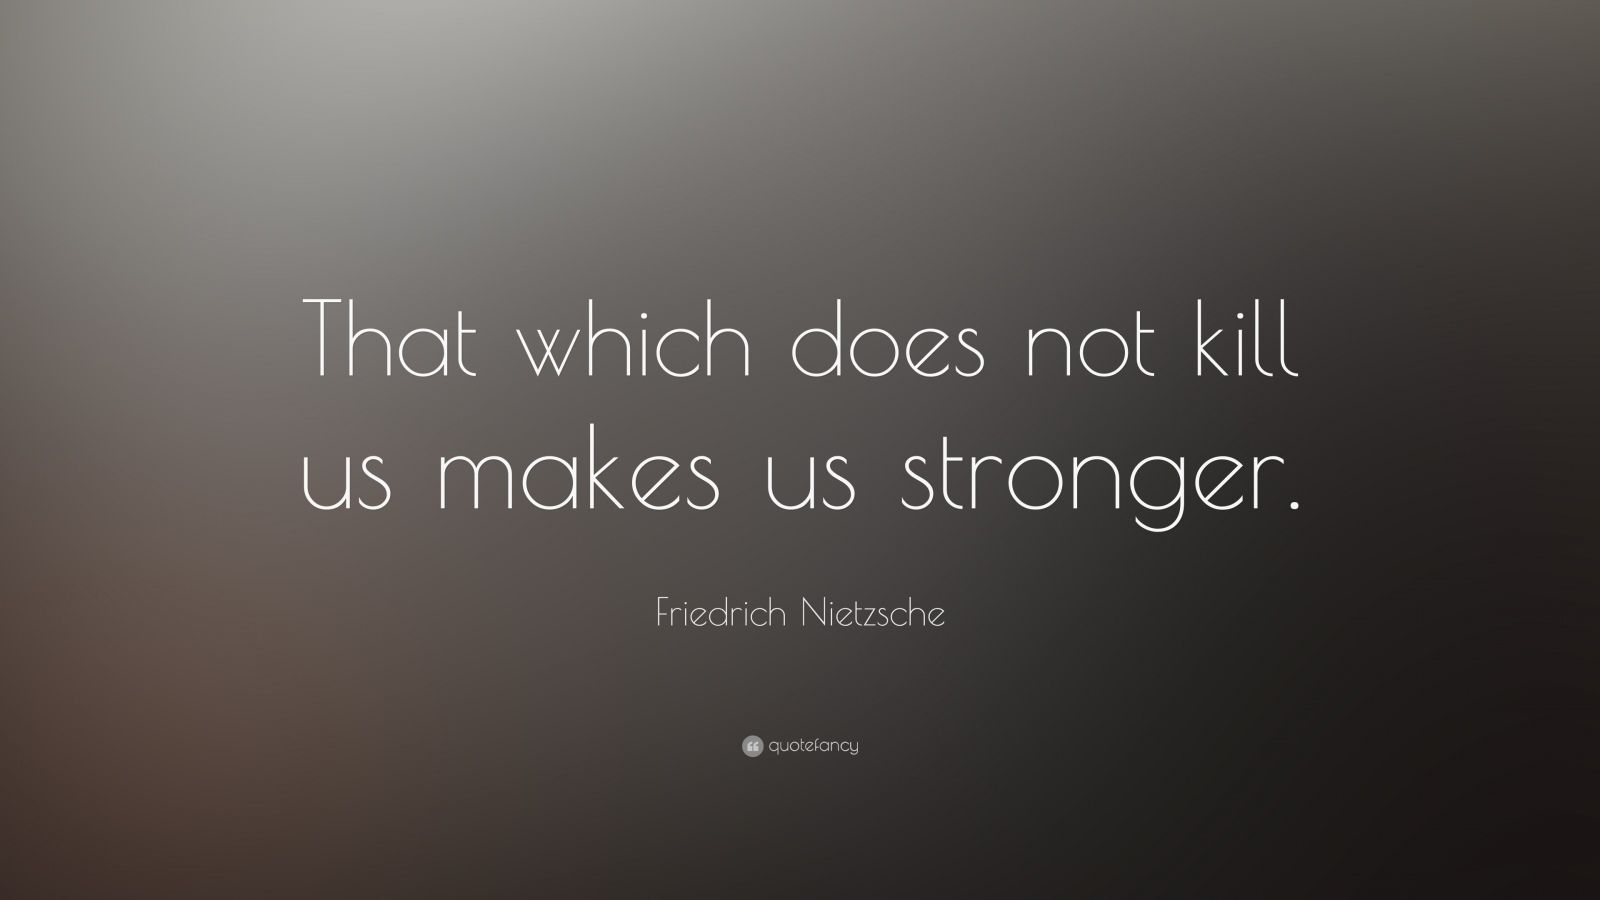 Friedrich Nietzsche Quote: “That which does not kill us makes us stronger.” (28 ...